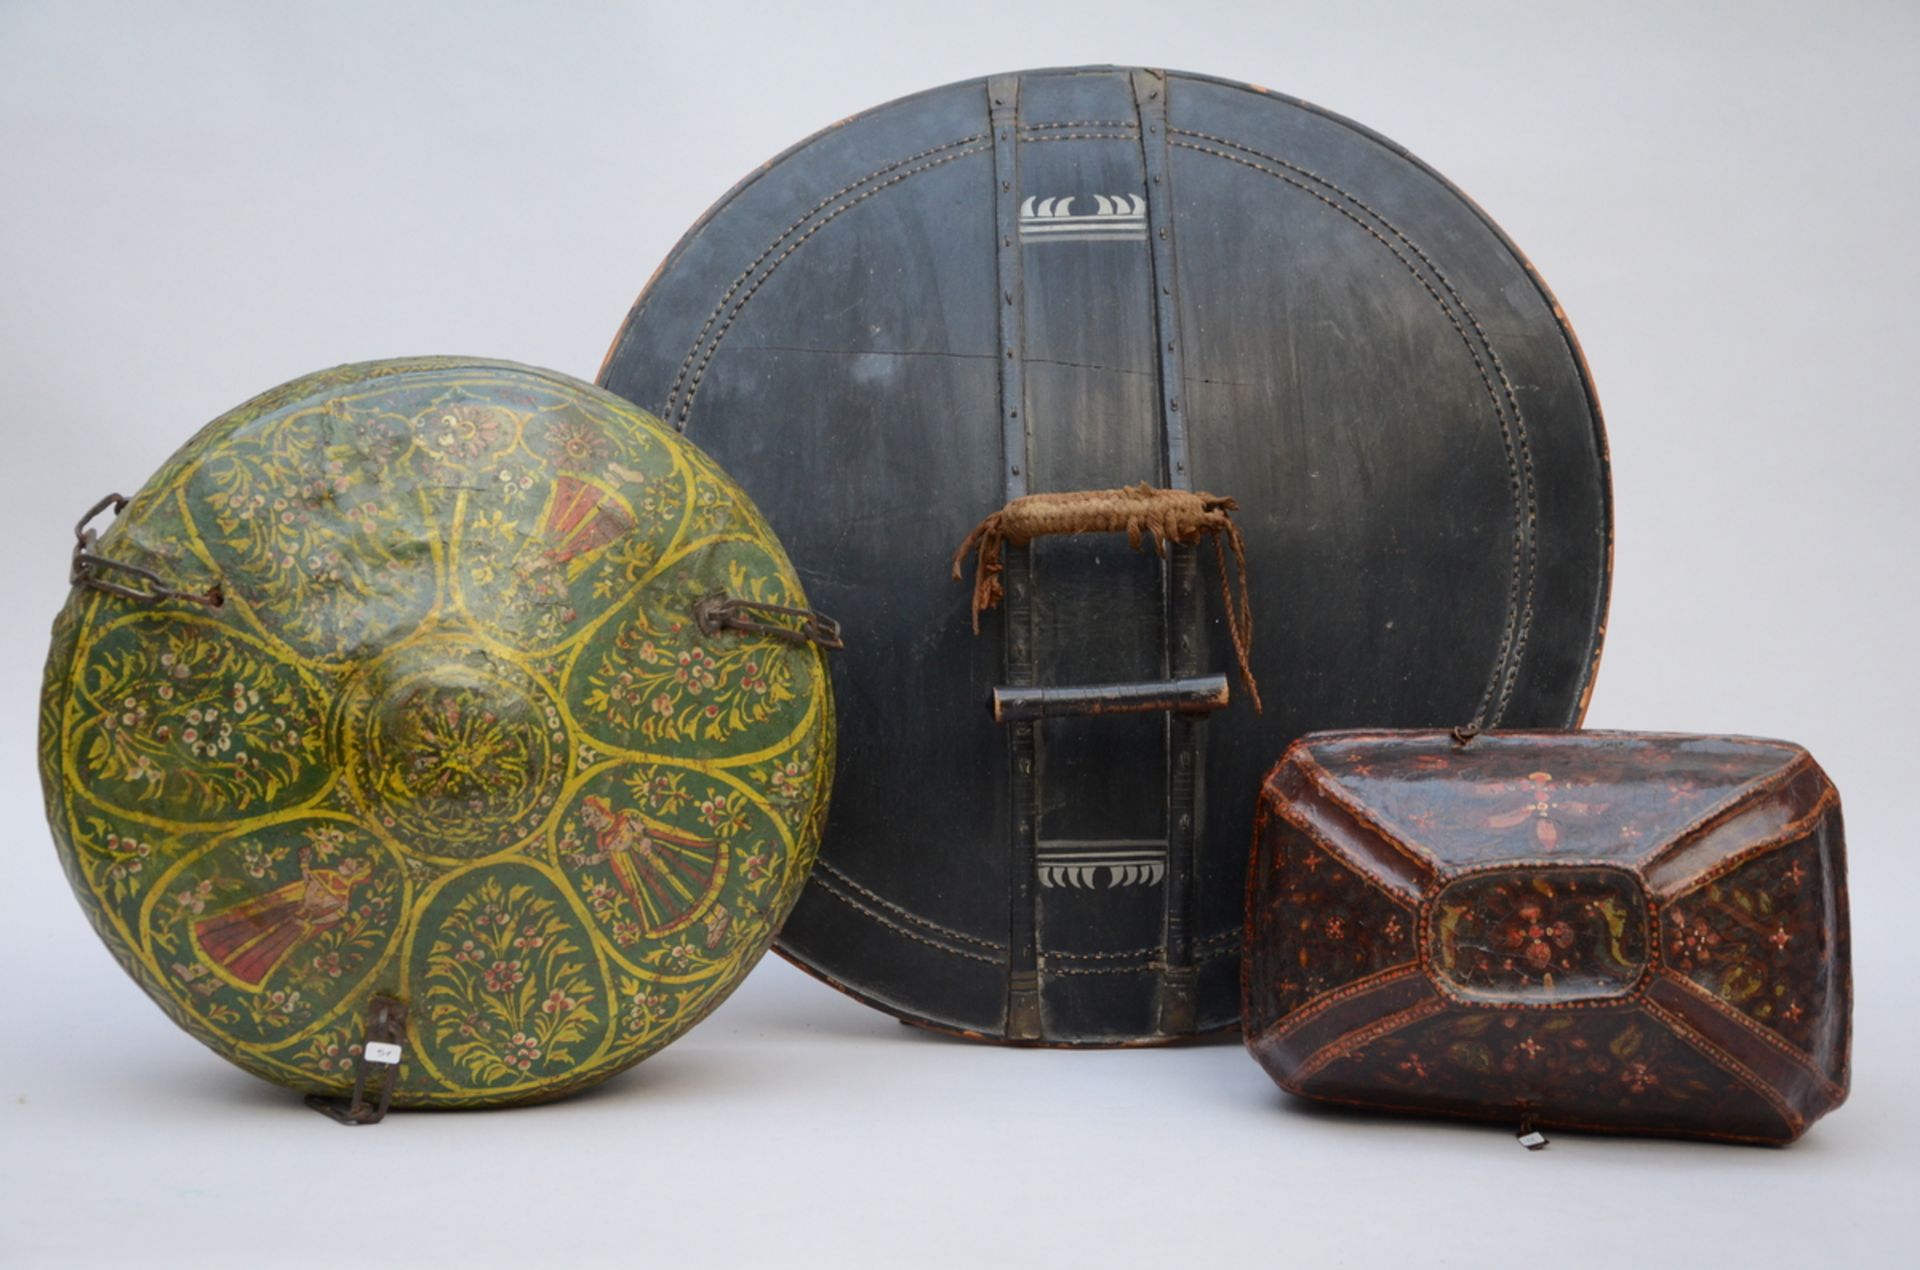 Lot of 3 objects in lacquer: shield (dia59cm) 2 Indian boxes (h20x29x19cm) (h23xdia34cm) - Bild 2 aus 3